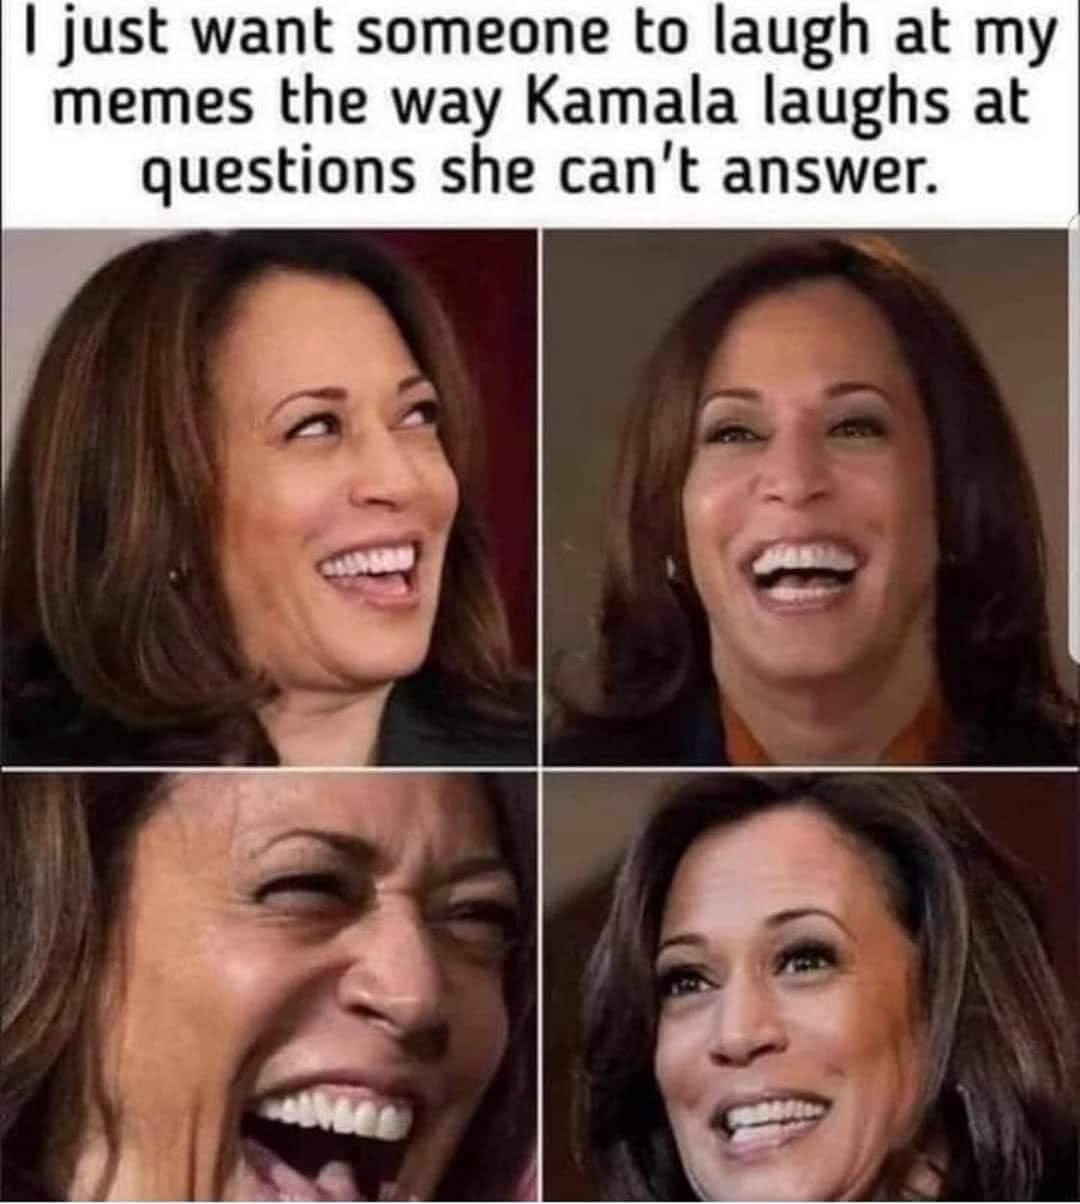 May be an image of 4 people and text that says 'I just want someone to laugh at my memes the way Kamala laughs at questions she can't answer.'